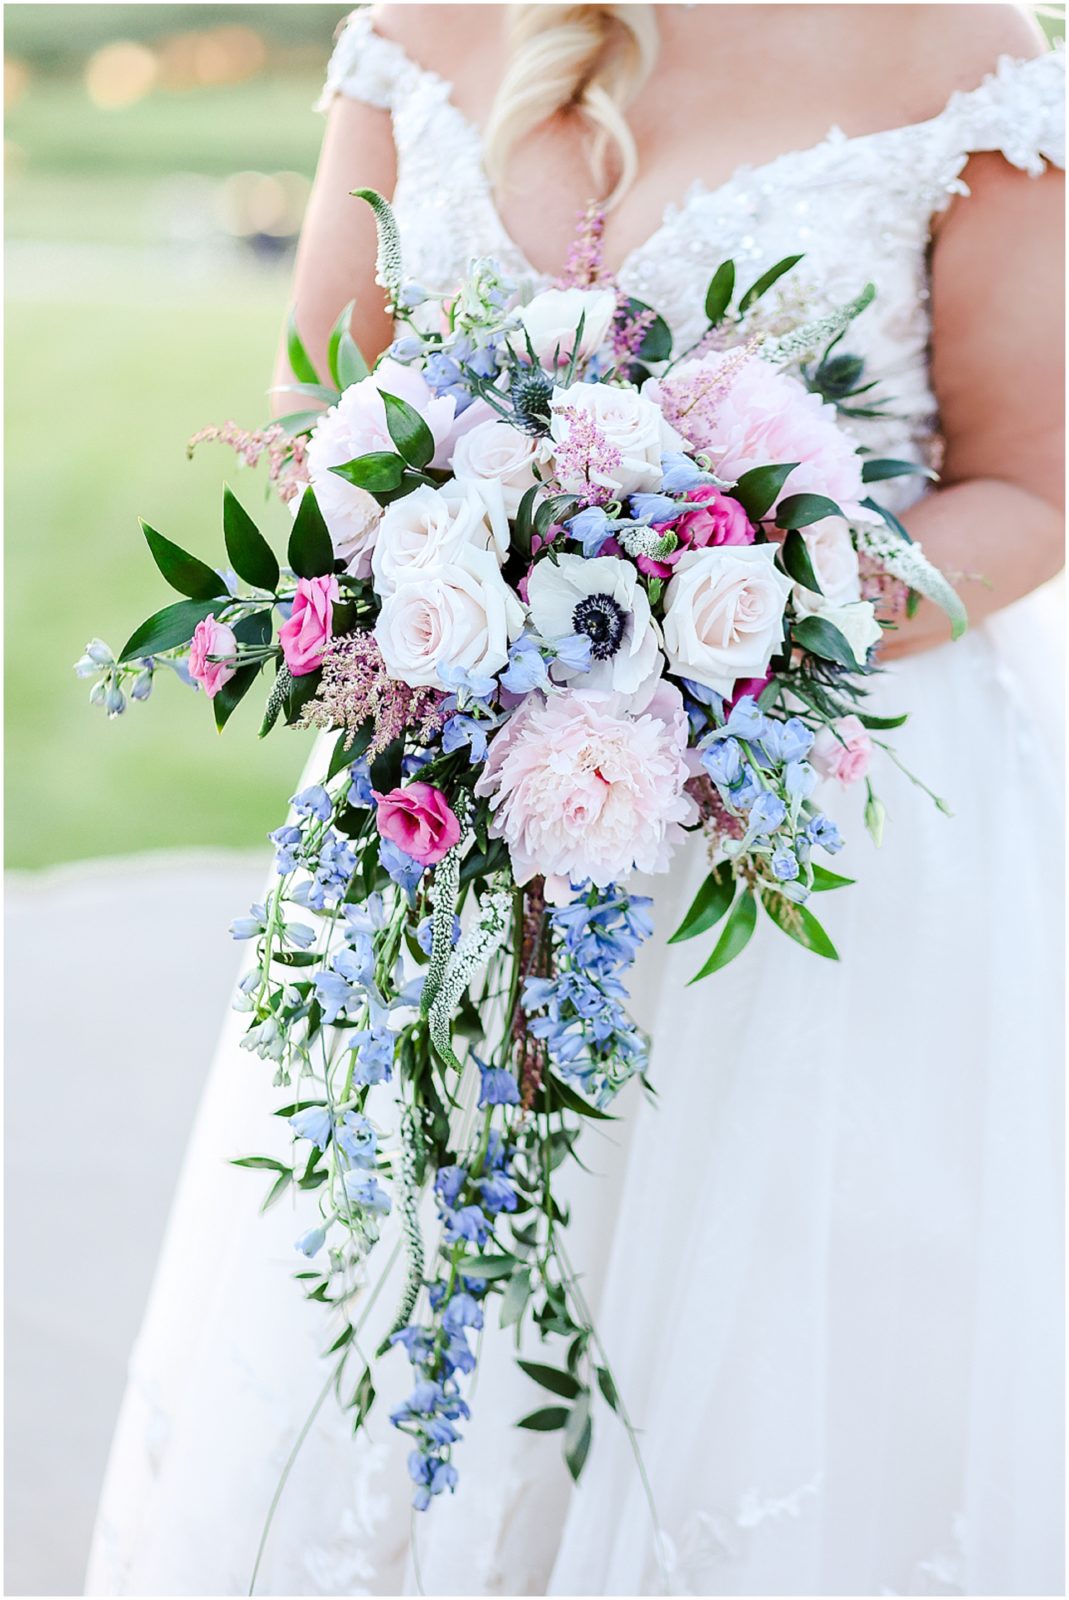 sunset photos with the bride and groom at a golf club - blue and pink wedding flowers bouquet 